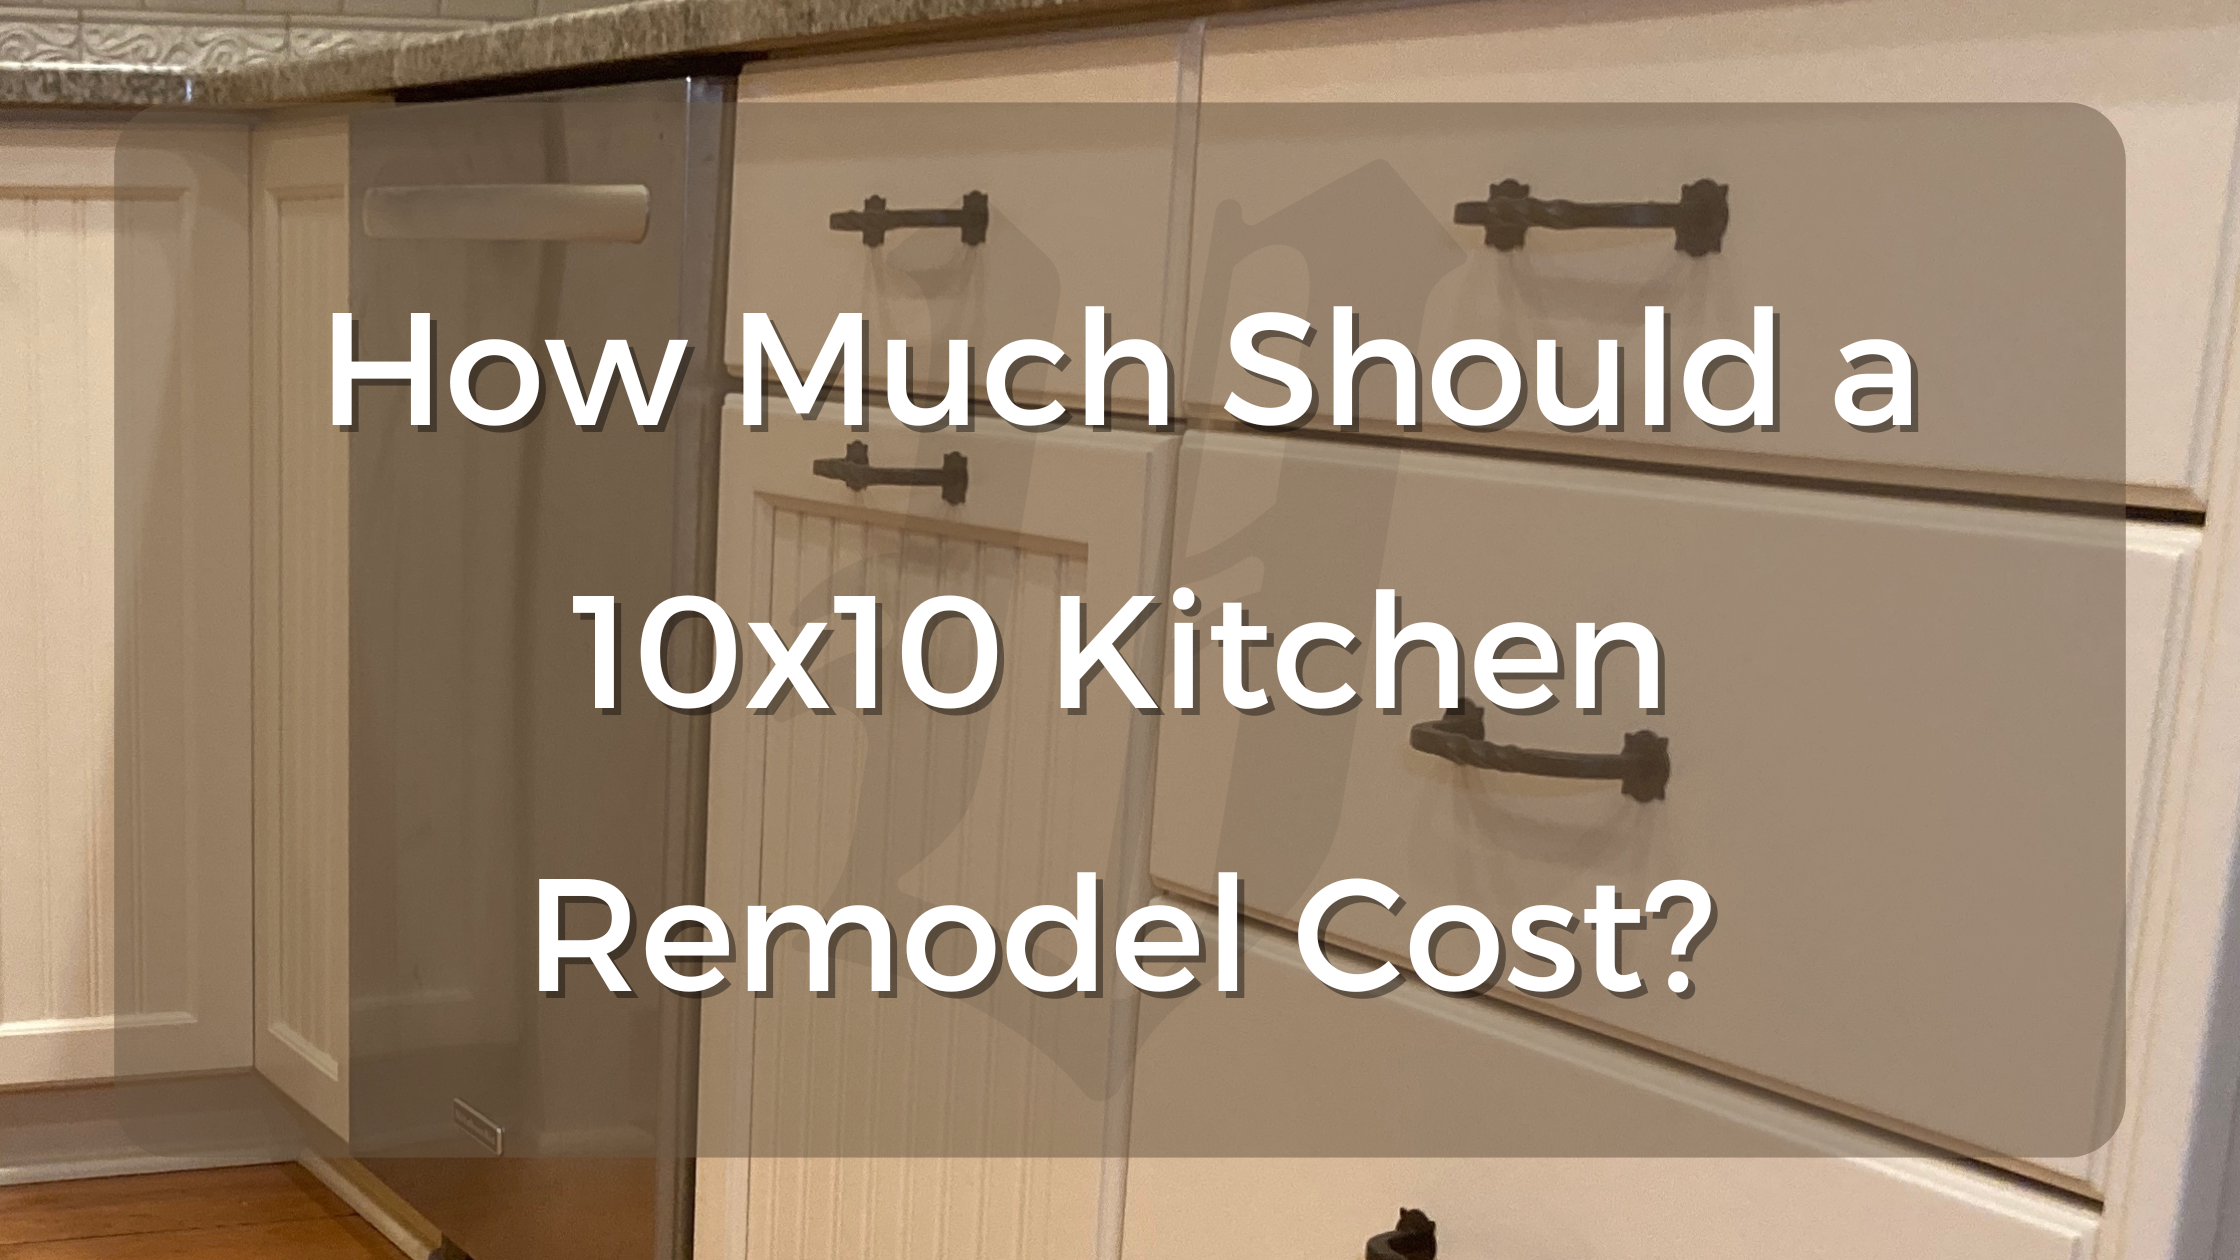 how much should a 10x10 kitchen remodel cost?